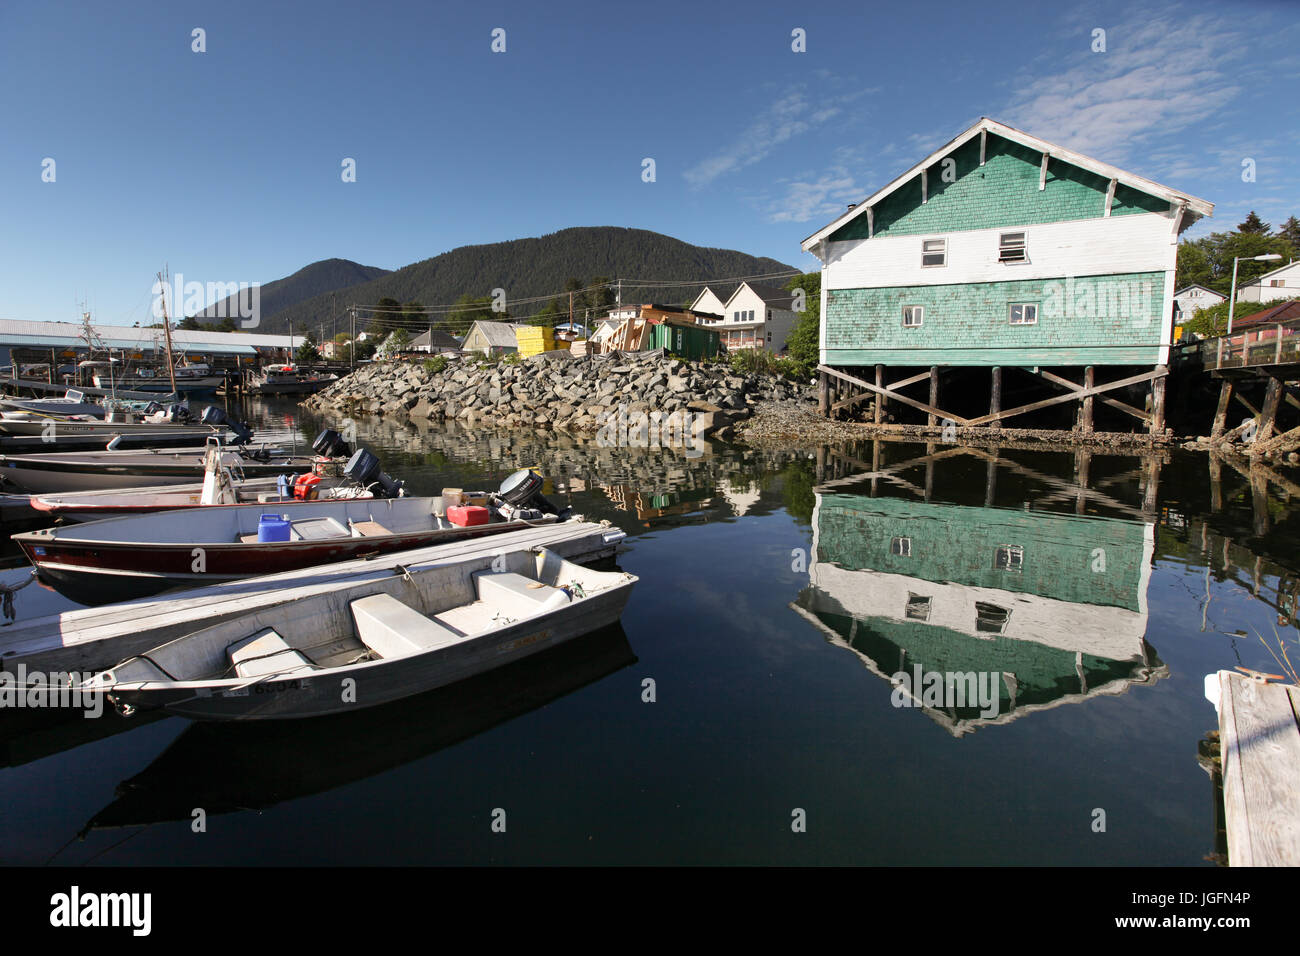 A waterfront home on stilts is reflected in the water filled with nearby fishing boats. Stock Photo